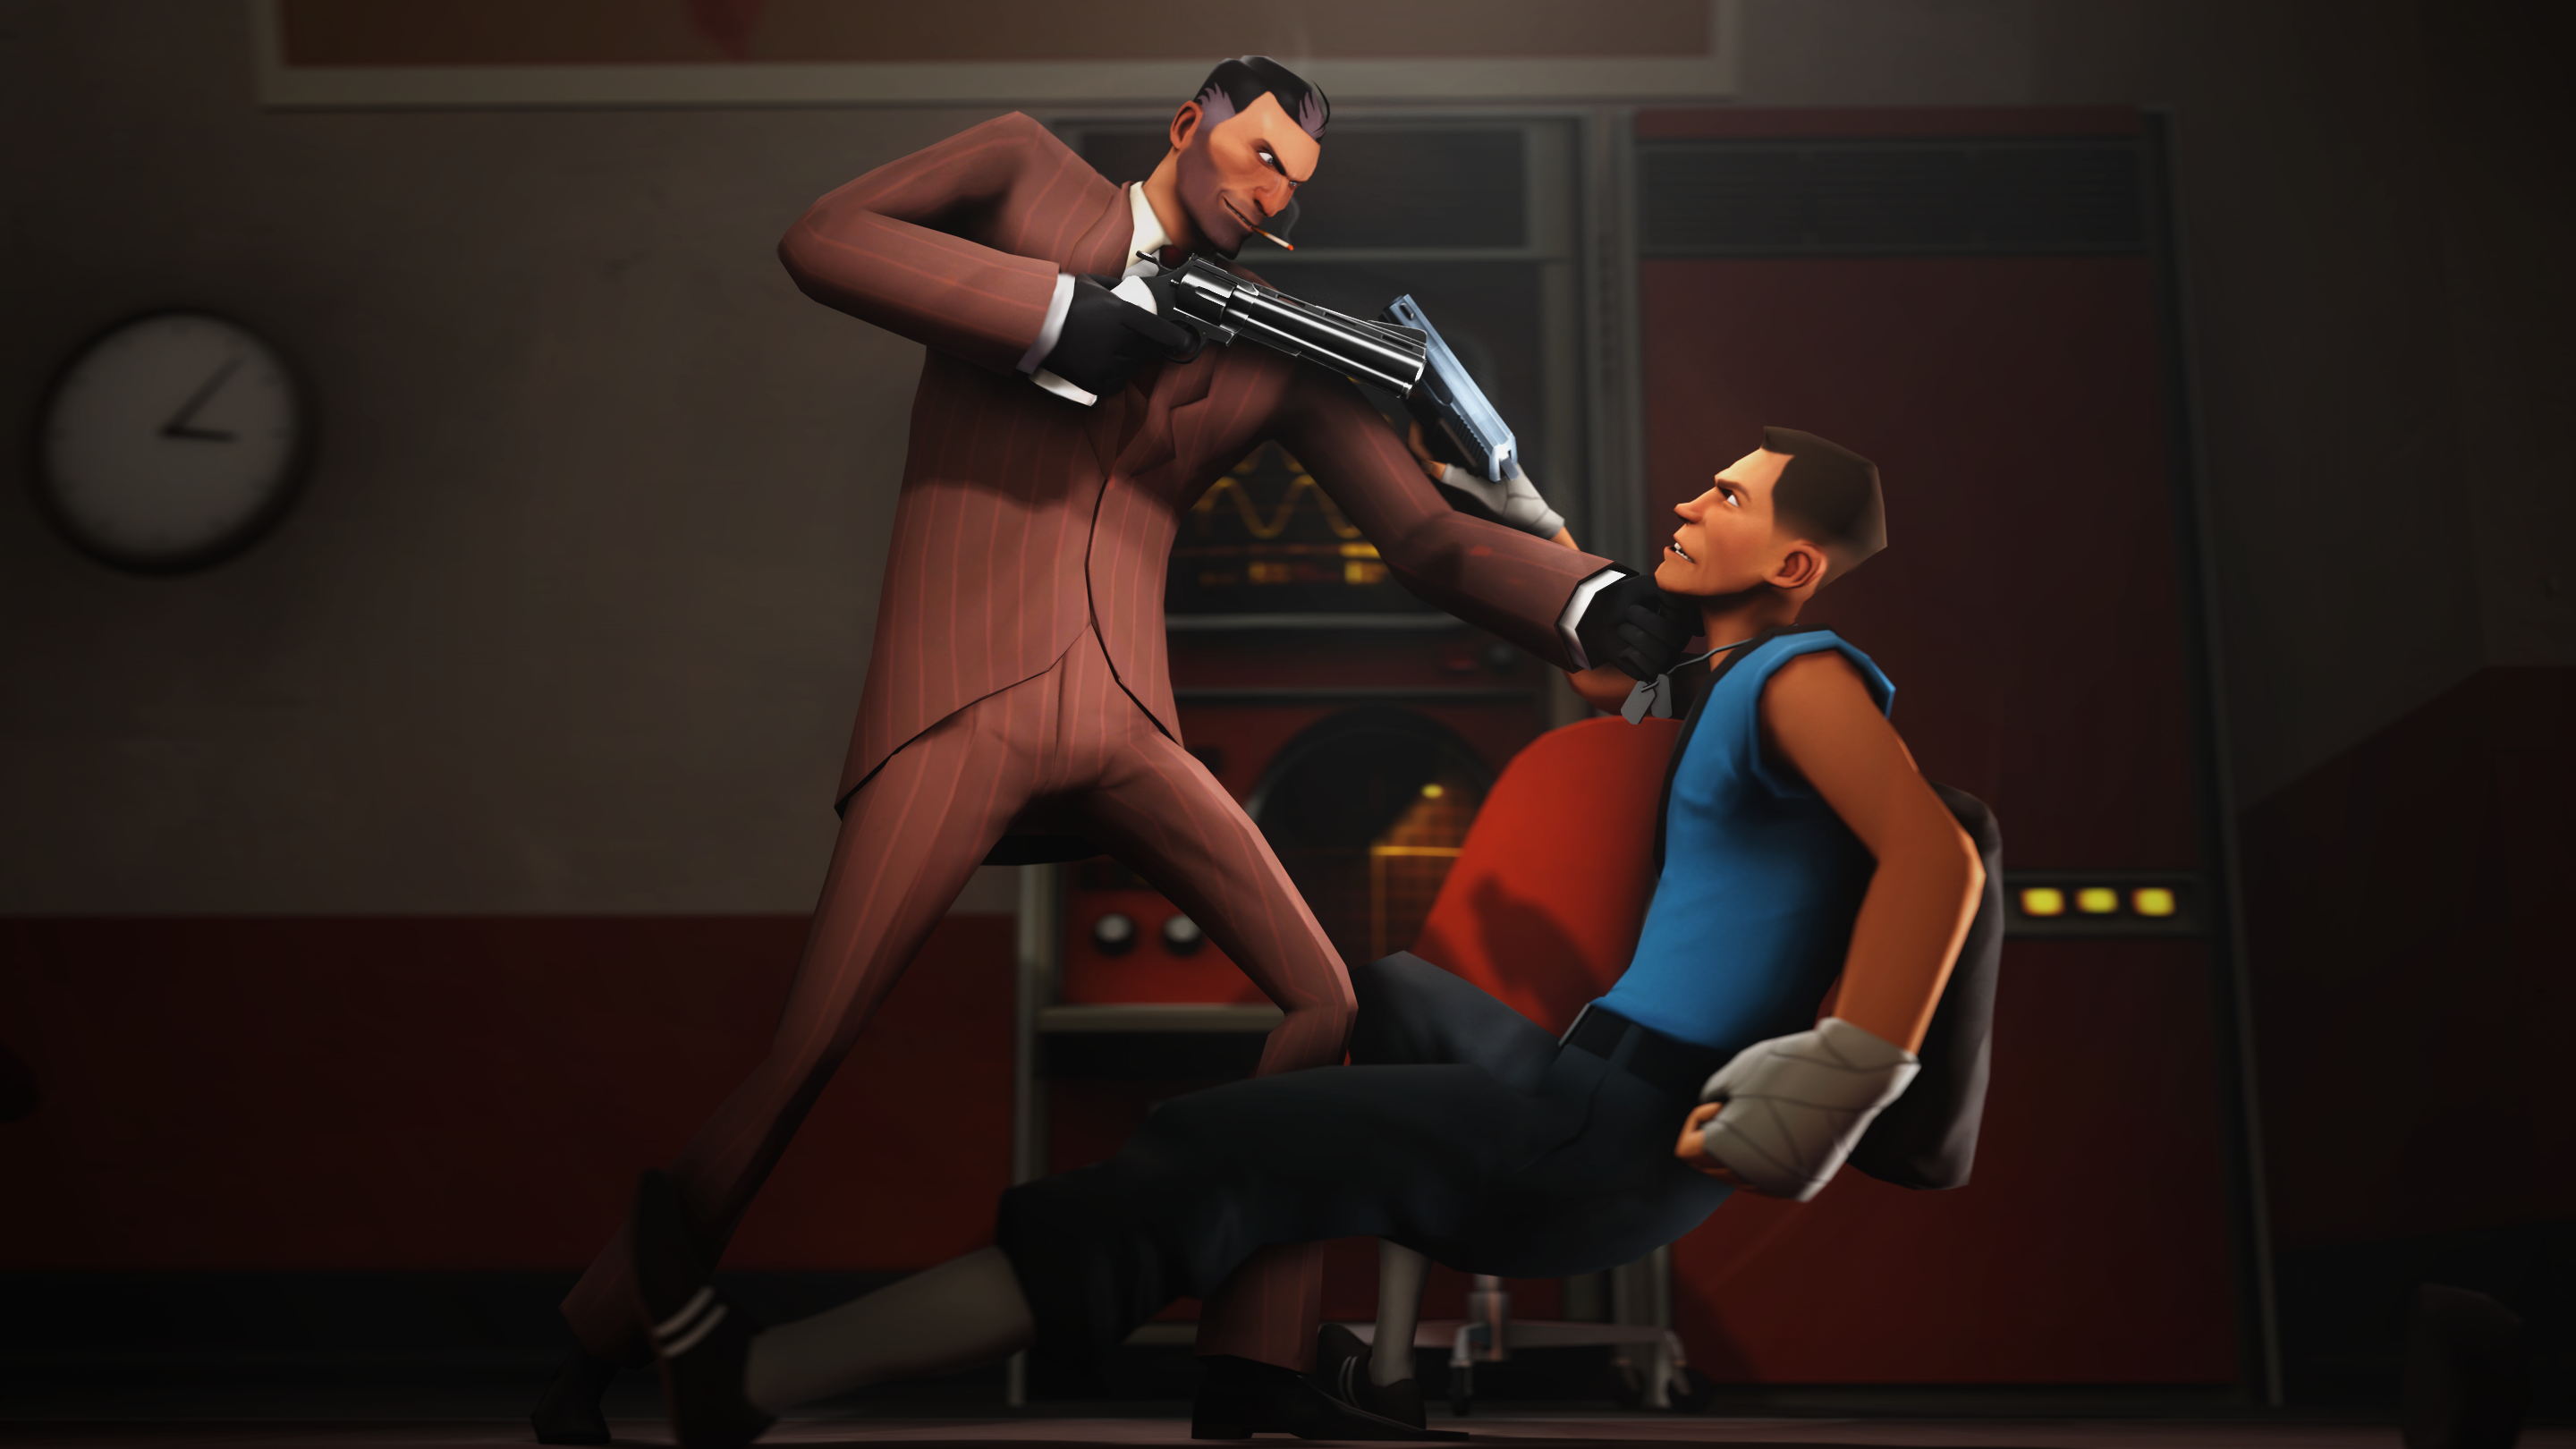 Tf2 Without Steam